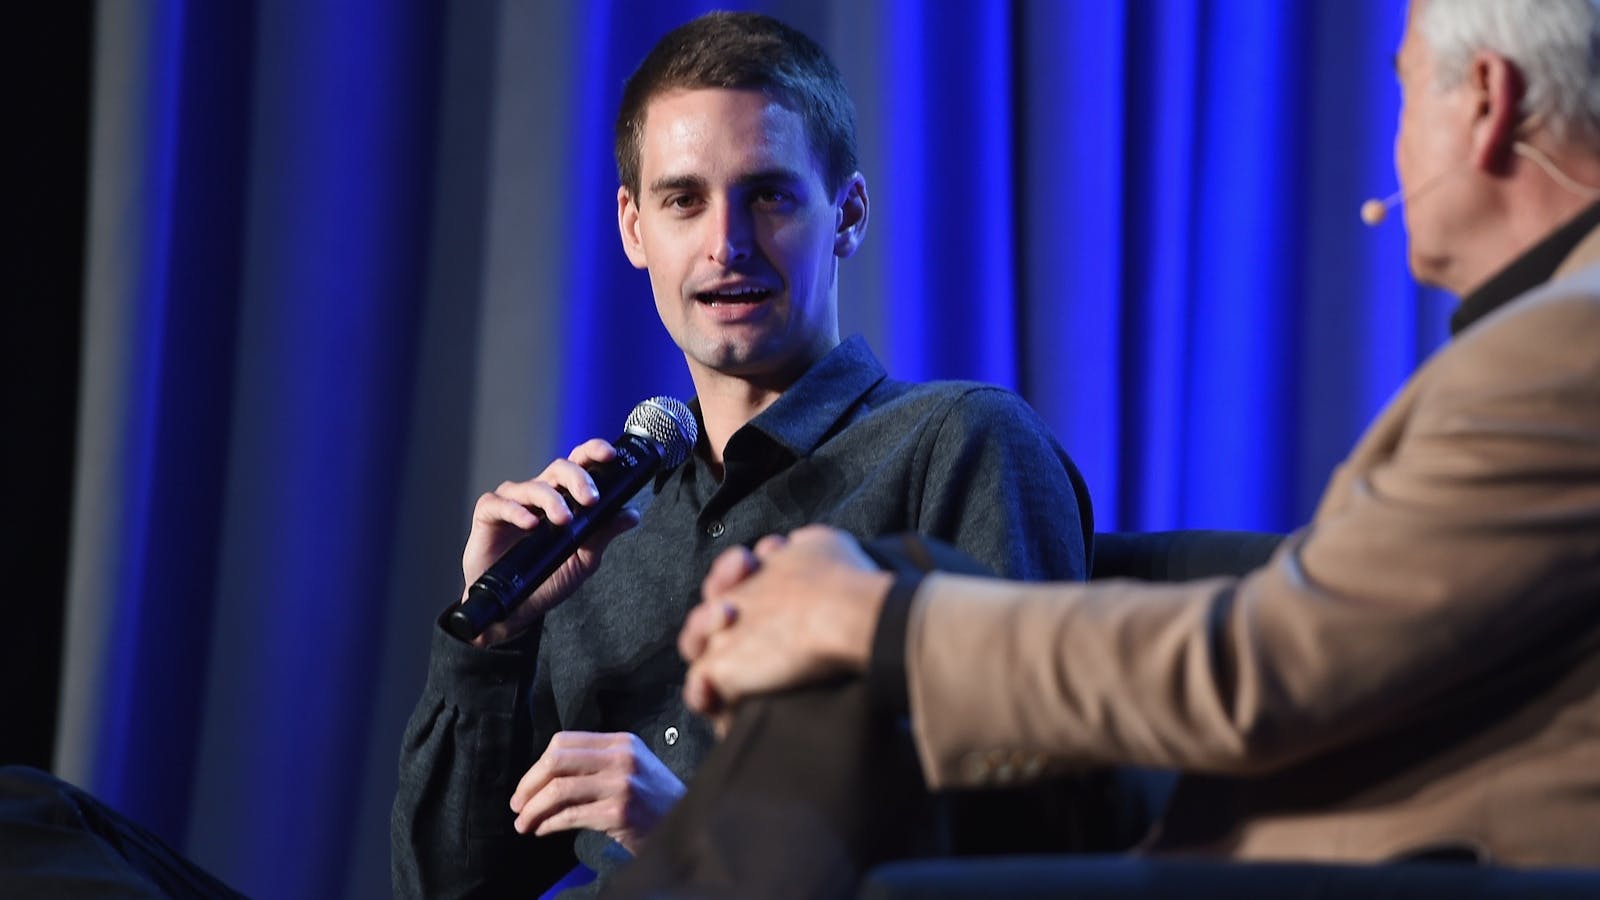 Evan Spiegel, left. Photo by Larry Busacca/Getty Images.